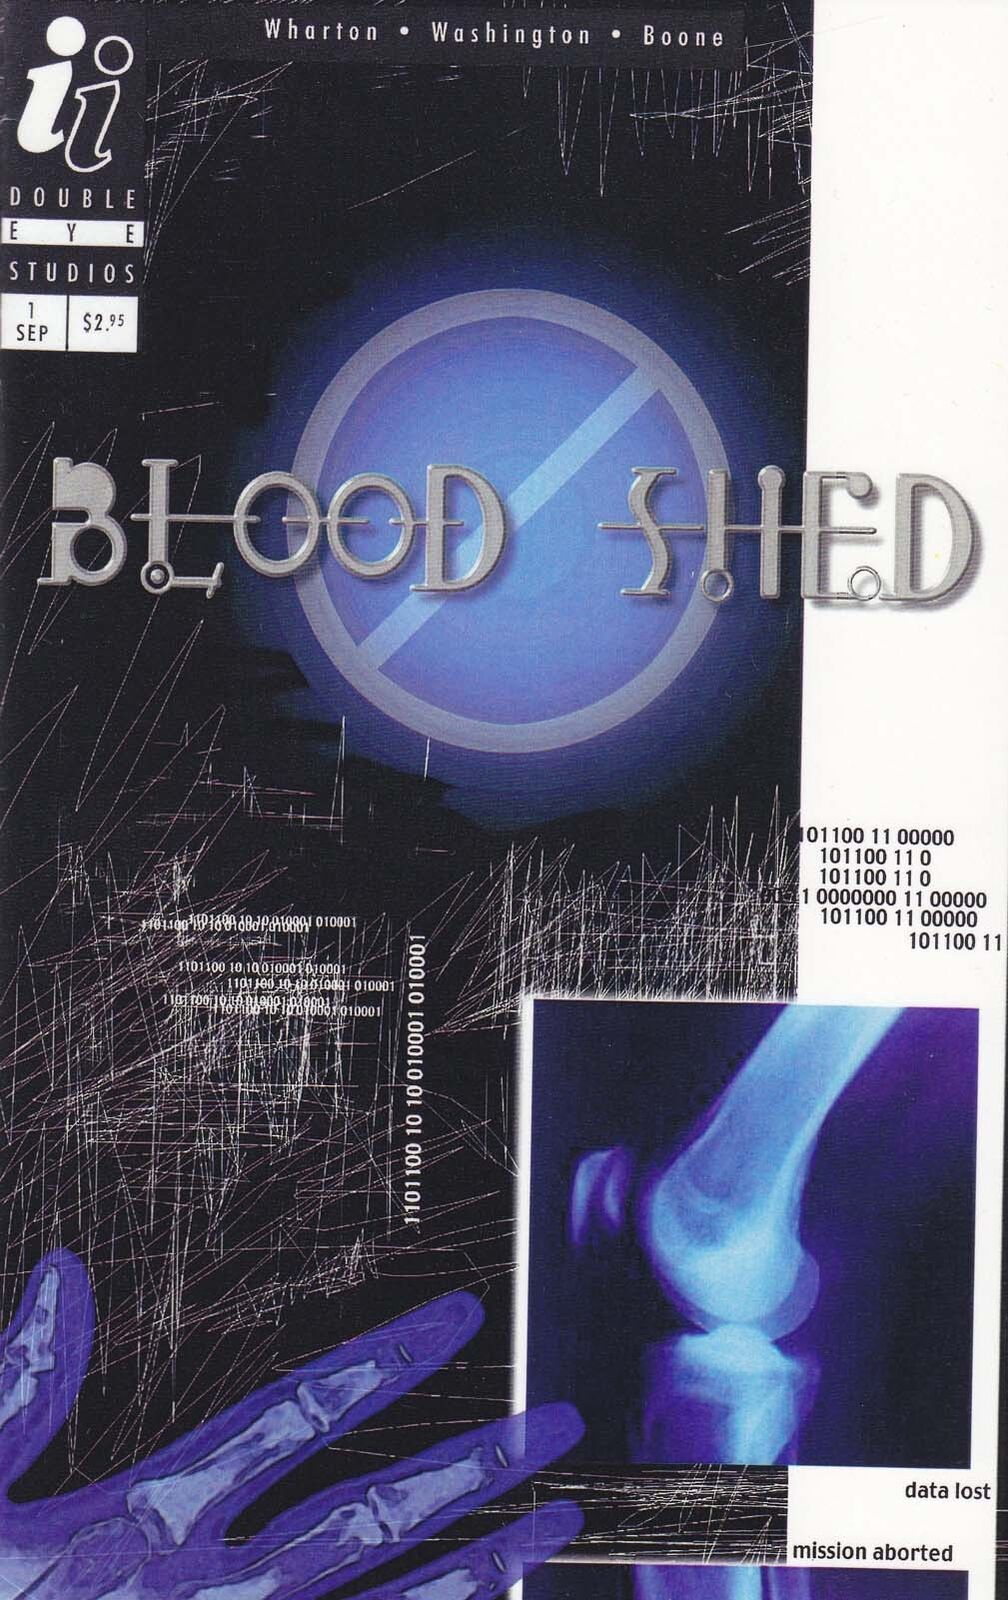 Blood Shed (1999) #1 VF/NM; Double Eye | we combine shipping